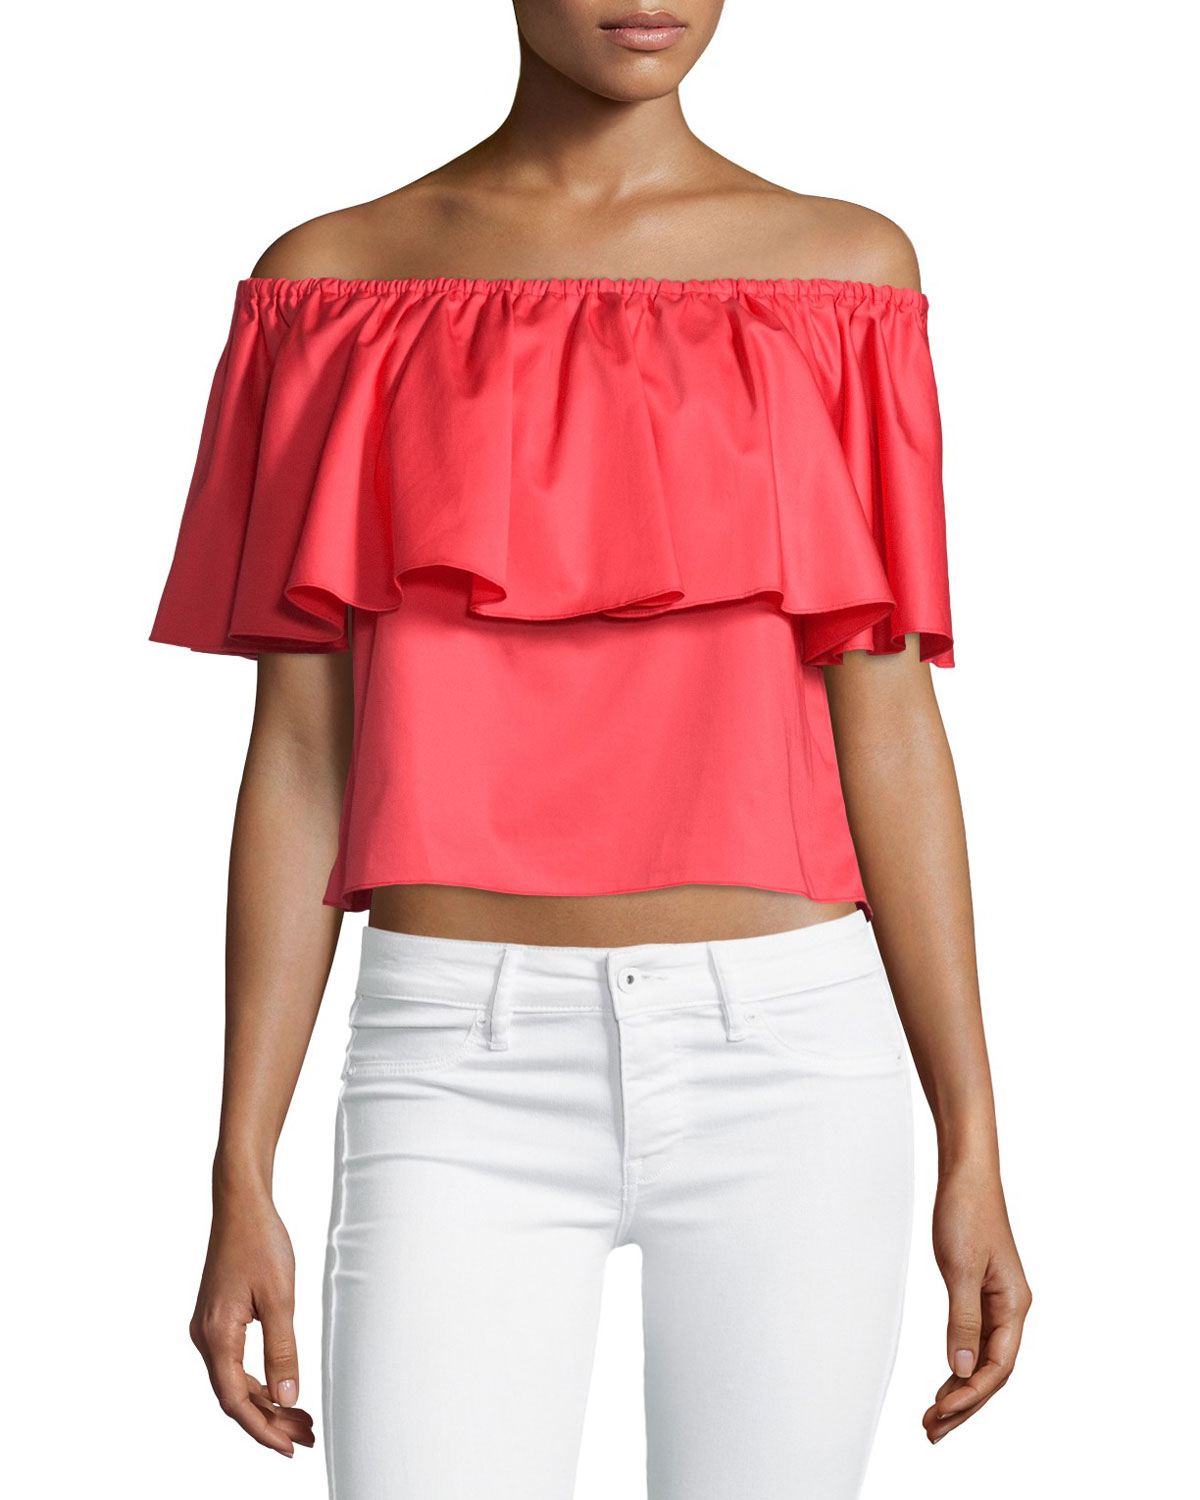 Lyst - Nicholas Off-the-shoulder Ruffle Top in Pink